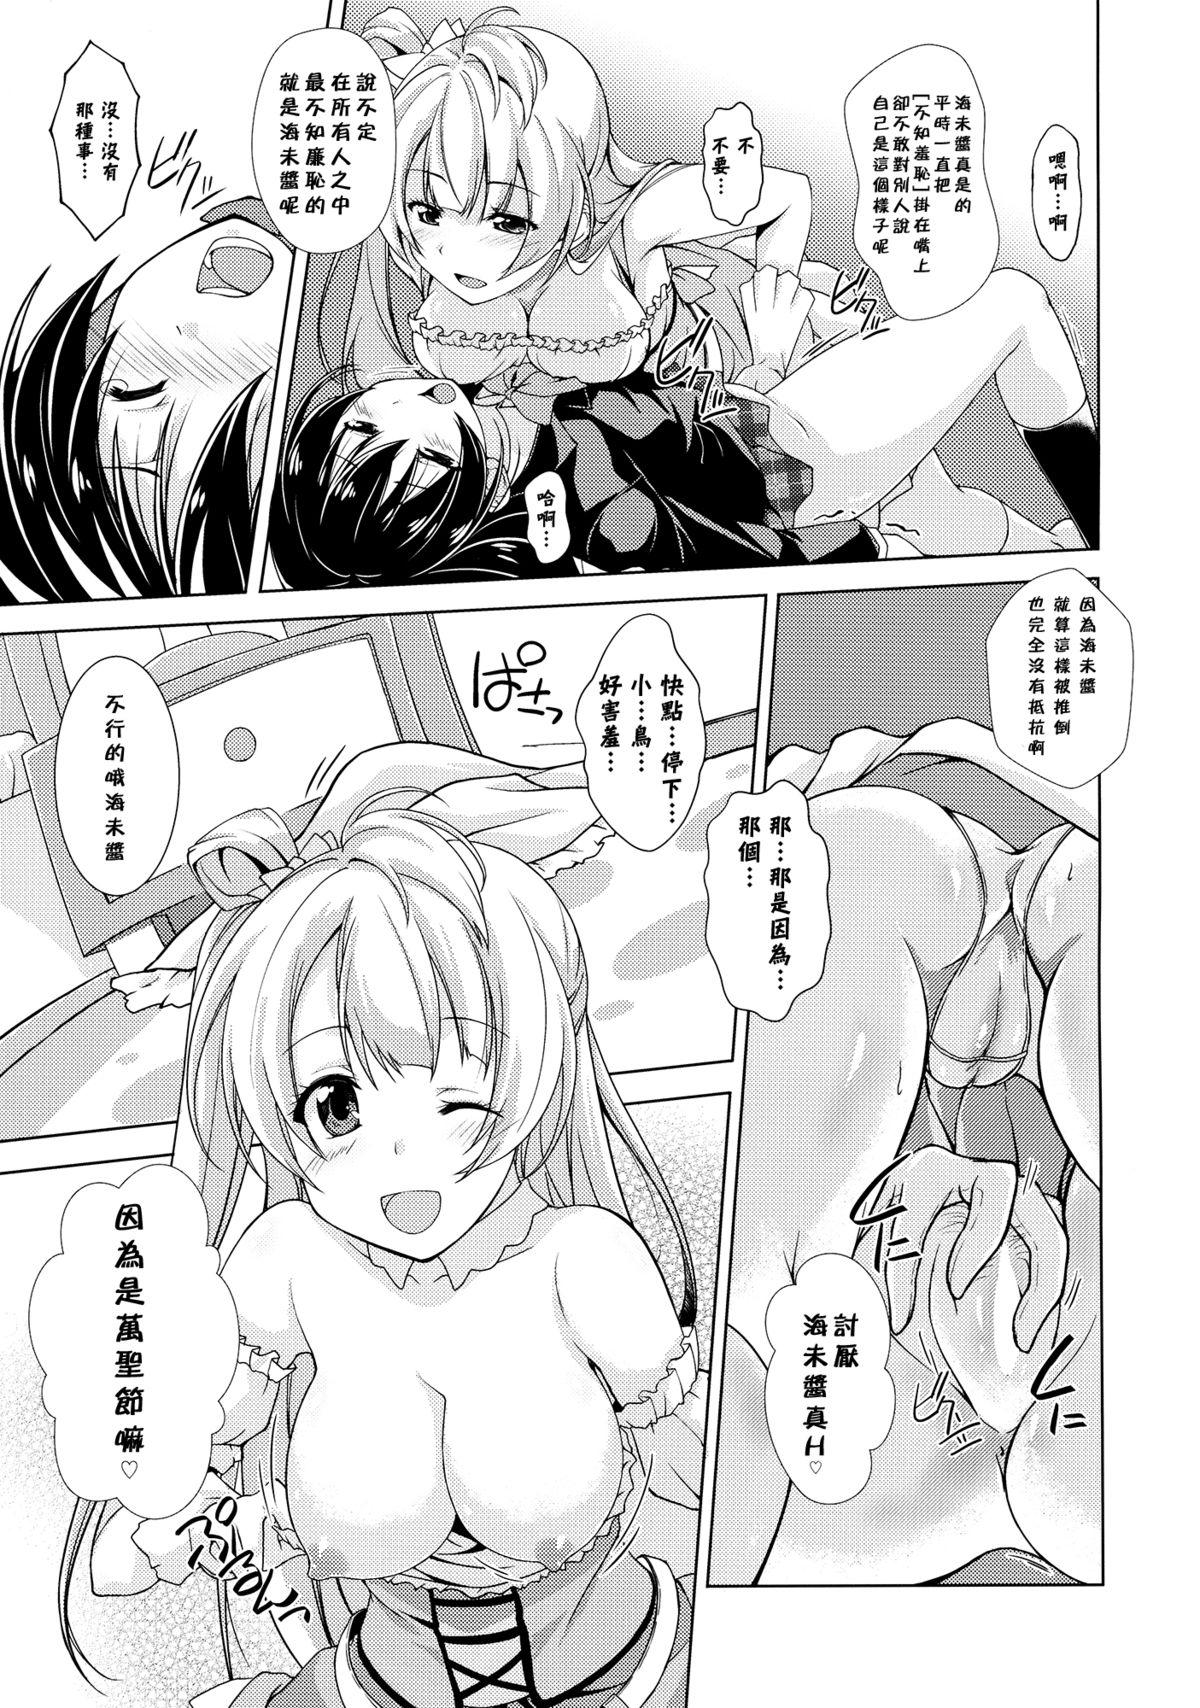 Punished Bavarois Passion - Love live Eurobabe - Page 8